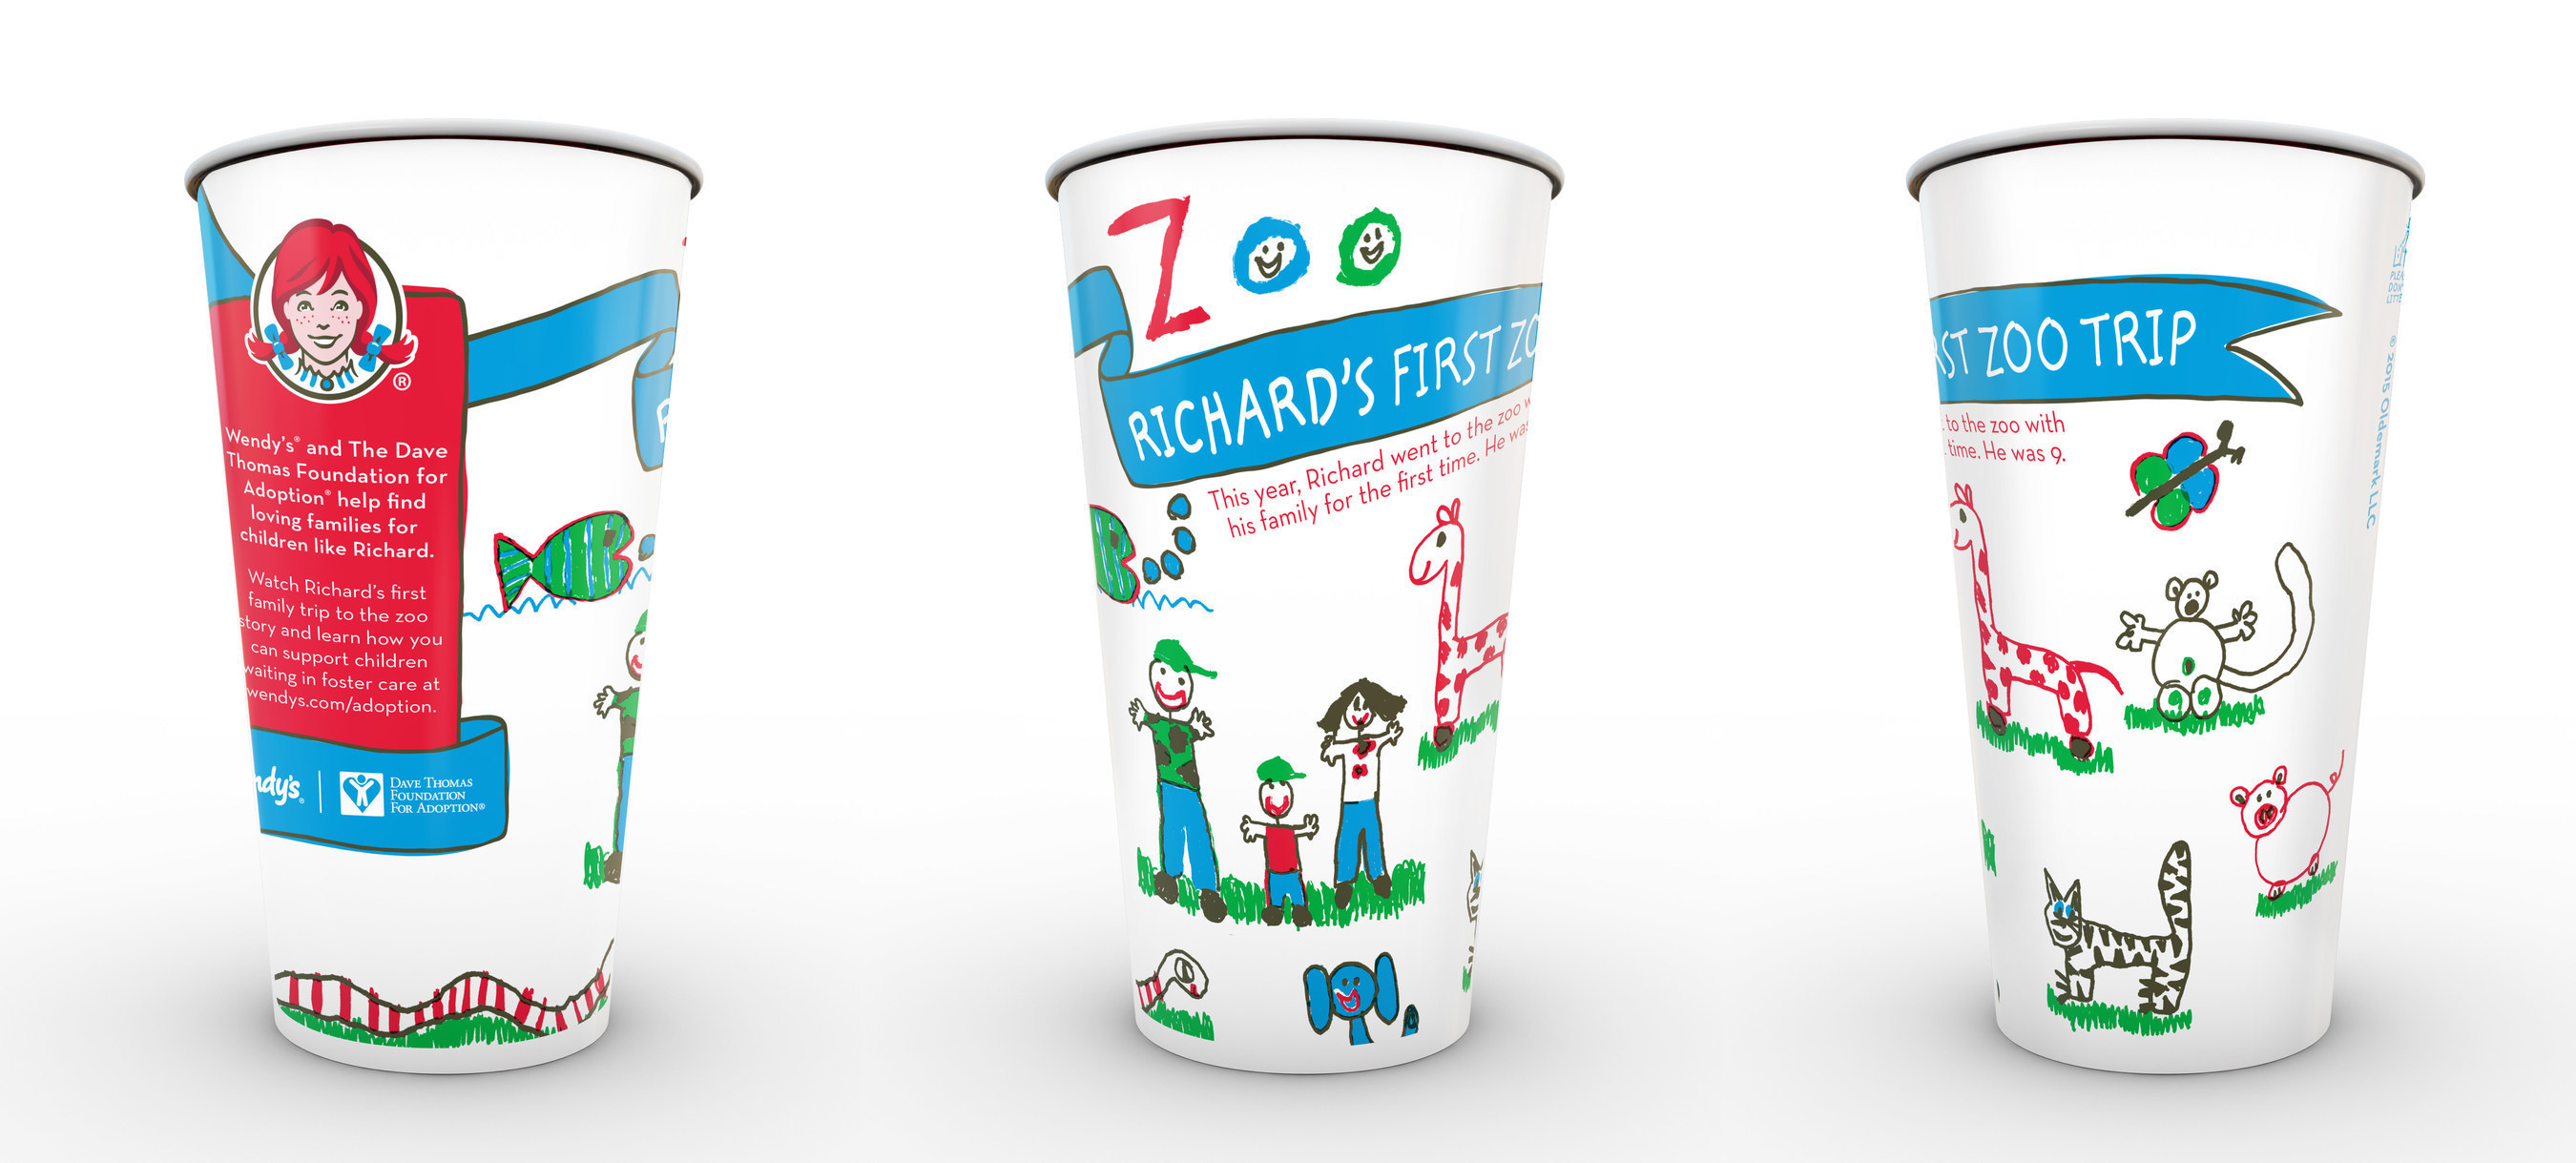 Wendy's is celebrating "Family First" moments with special cup designs drawn by four adopted children united with their forever families through the Dave Thomas Foundation for Adoption. Each cup features the children's individual "Family First" experiences with their forever family. The stories come to life on wendys.com/adoption as the children recount their stories over an animated illustration.